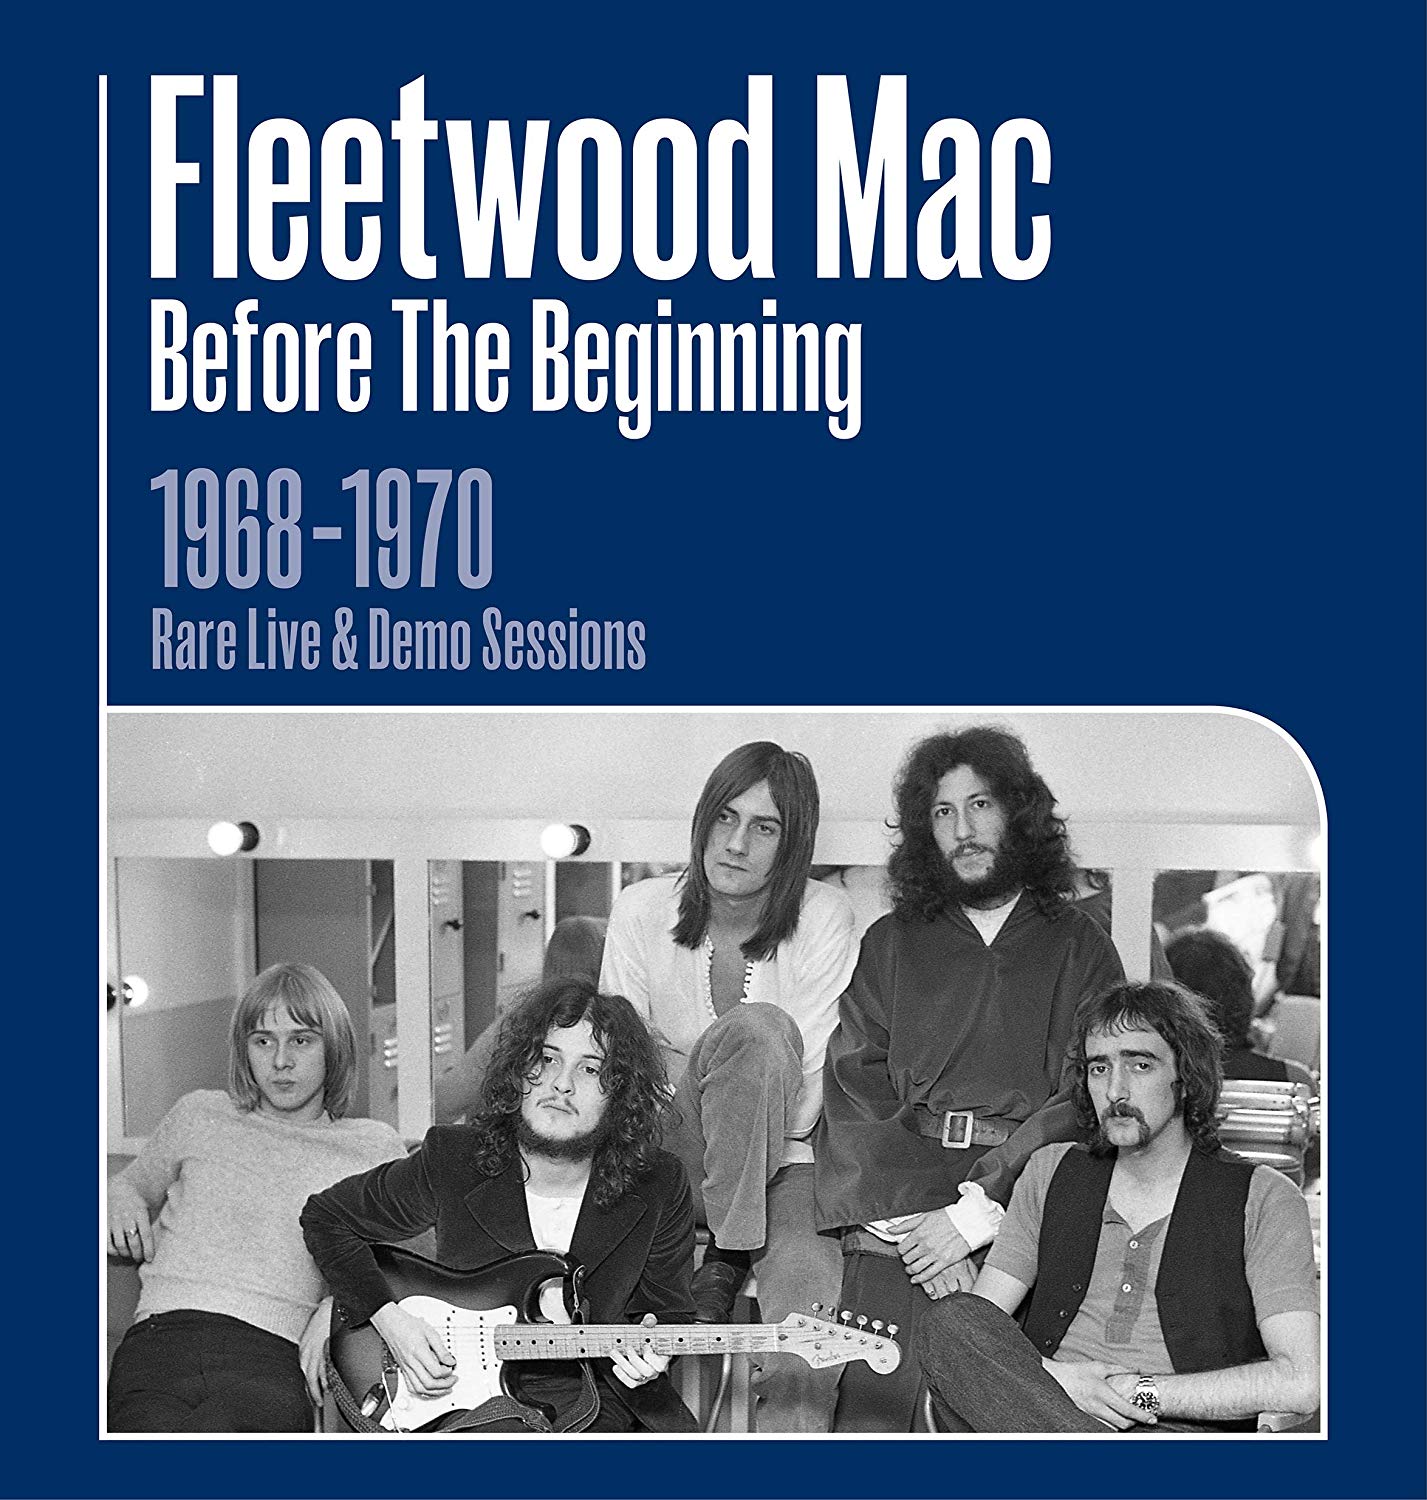 Fleetwood Mac Before The Beginning 1968 - 1970 Live And Demo Sessions